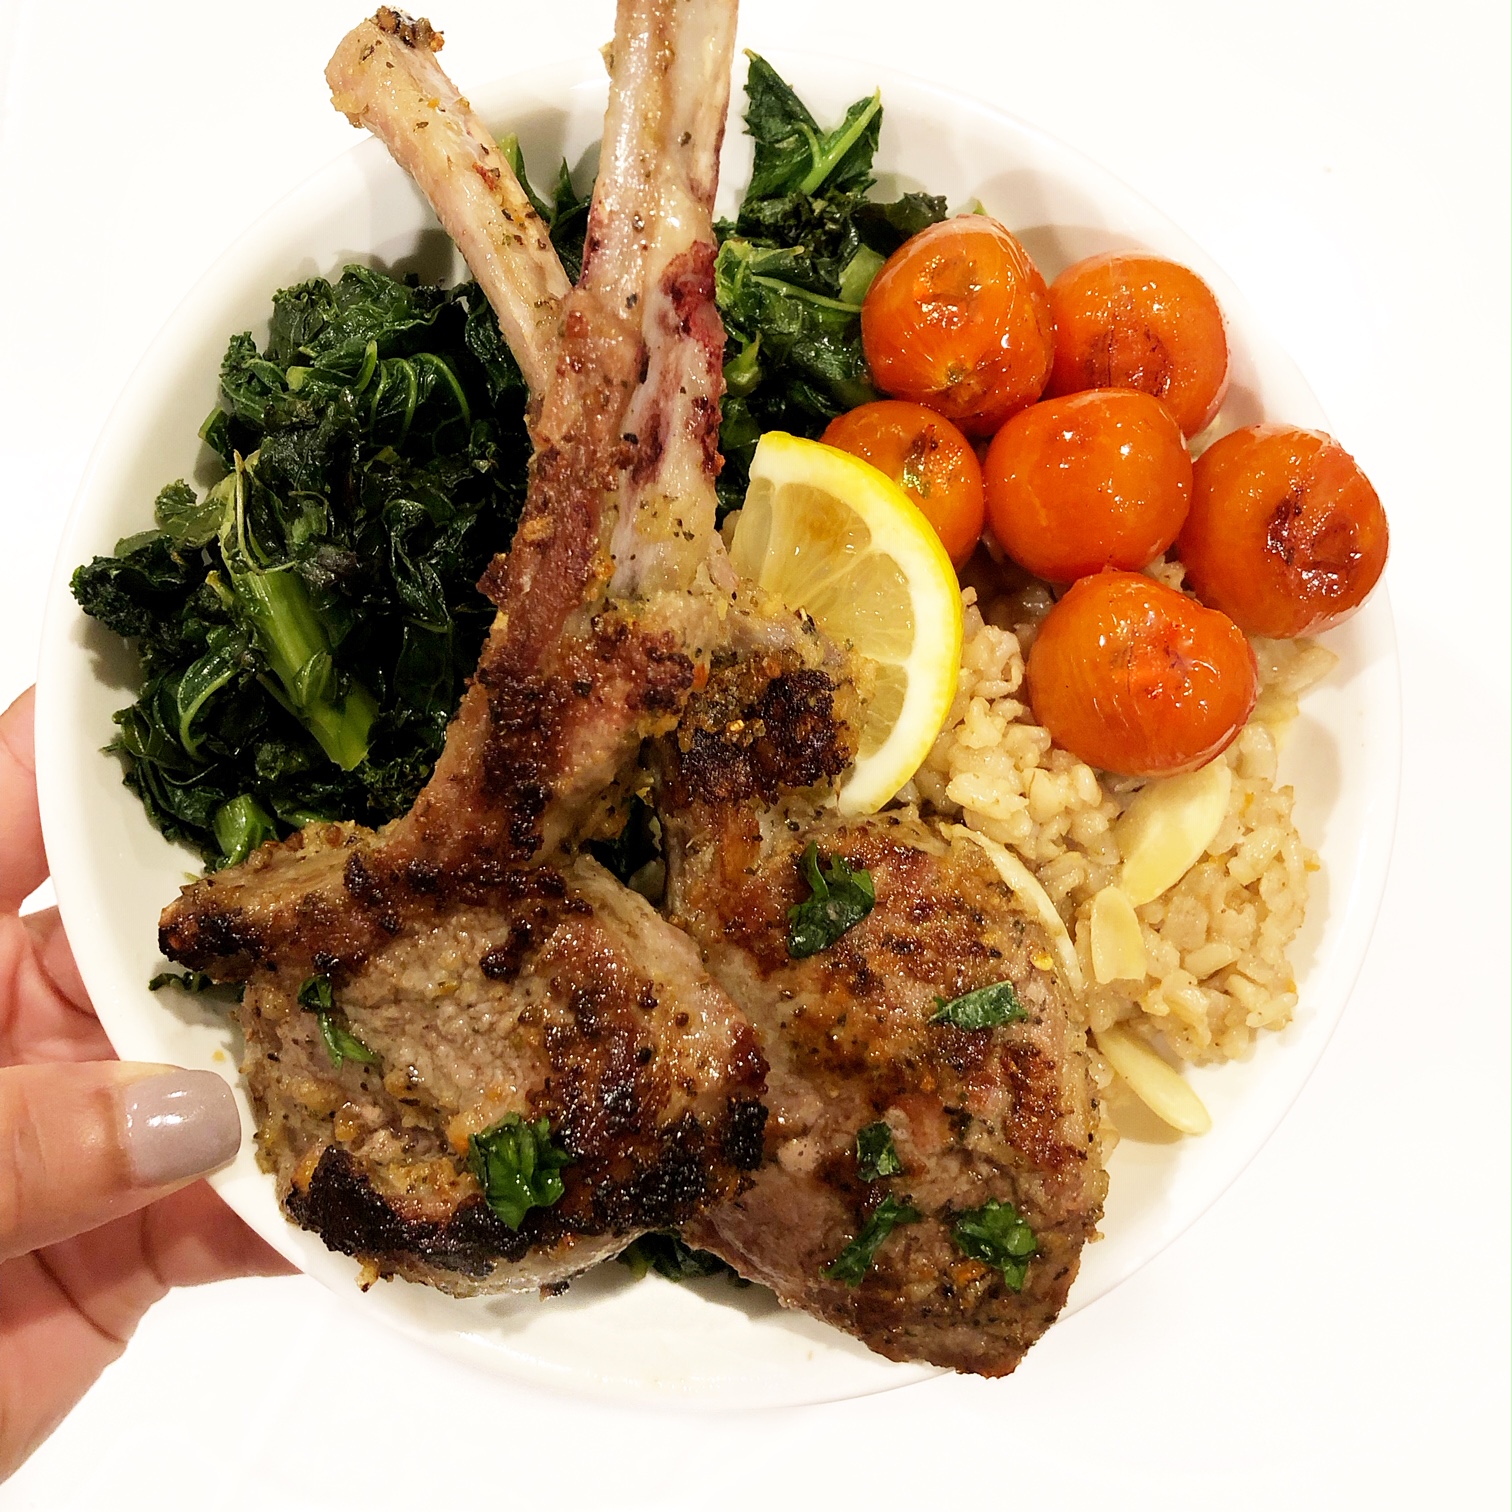 cooked lamb chops with roasted tomatoes, salad, and masala rice in a plate held by a hand with purple nail polish